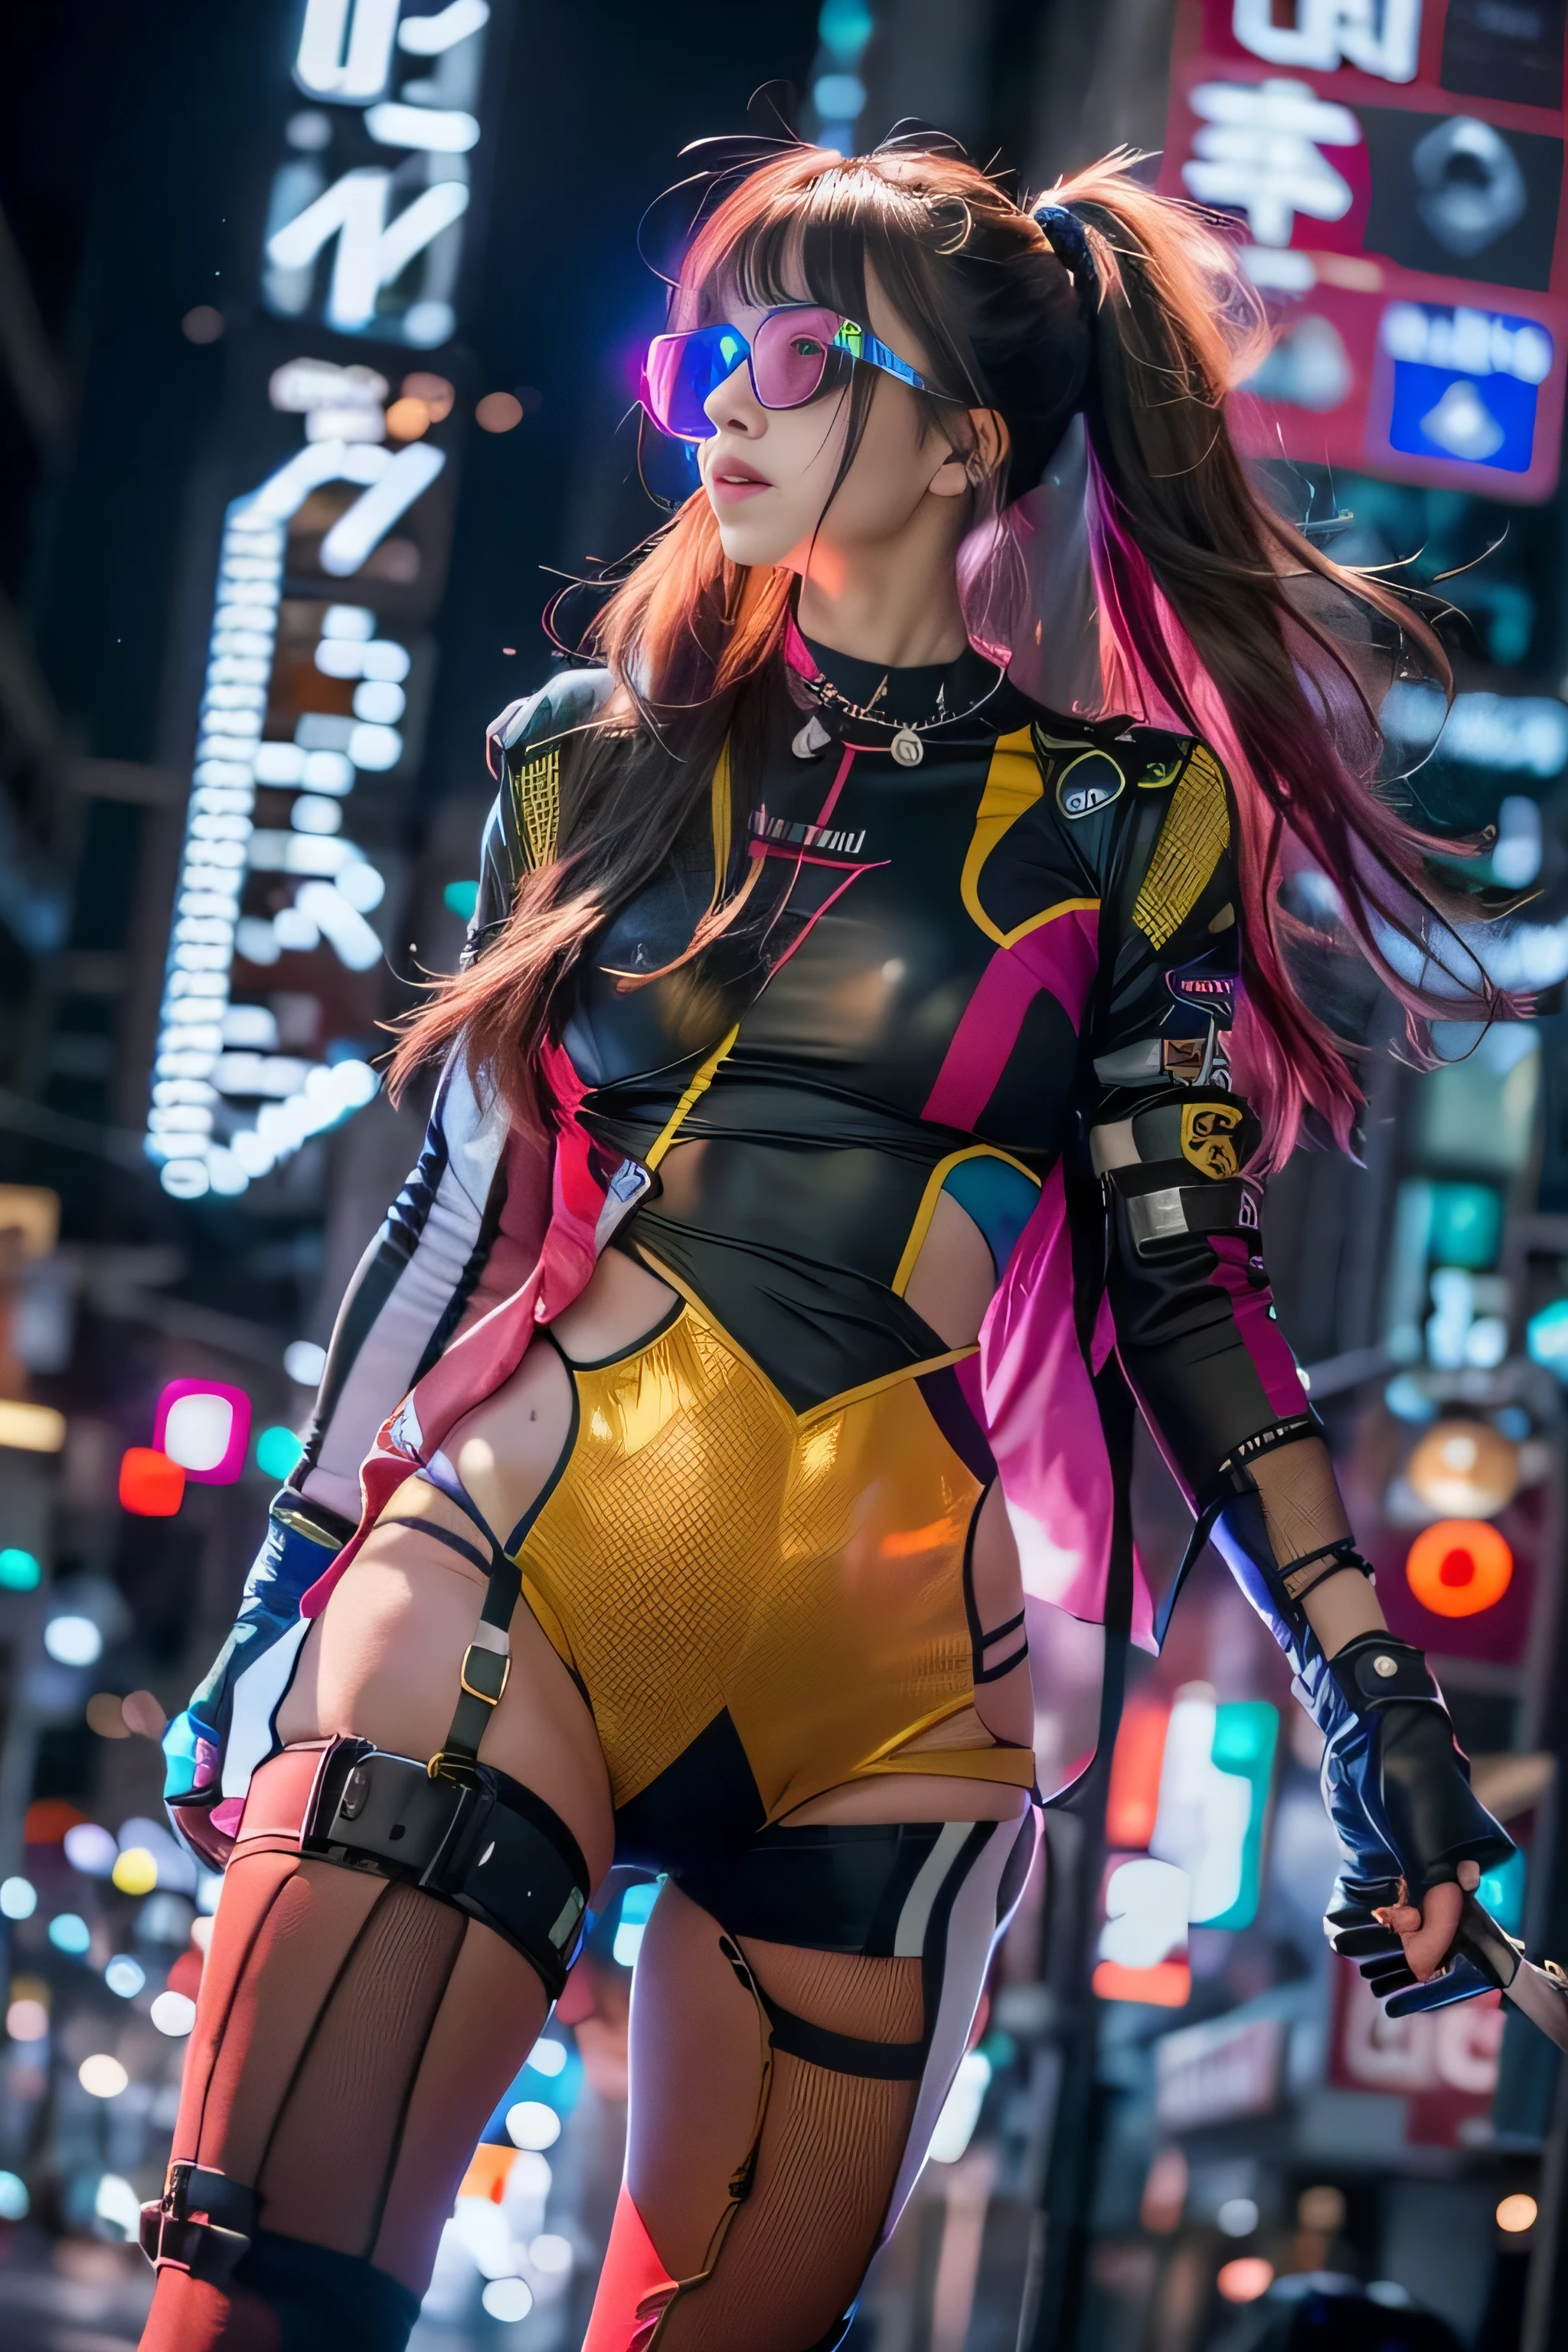 RAW image quality, 1 girl, Japanese, 17 years old, table top, Dystopian city with neon signs and holograms projected on buildings and sky, slim beautiful woman, Surrounded by neon-lit reflections of the cityscape, written boundary depth, Beautiful woman with slim figure, (nipple protrusion), hologram tight sheer clothes, fit girl, Strong lighting hits the bodysuit, hourglass figures, high contrast clothing, hologram clothes, (walk towards the camera), (Look into the viewer&#39;s eyes), lipstick, yellow virtual reality glasses, long red straight hair, night, cyberpunk aesthetics, highly detailed lighting, dramatic, In 8K, high detail, skin texture, リアルなskin texture, armor, highest quality, High resolution, Photoreal